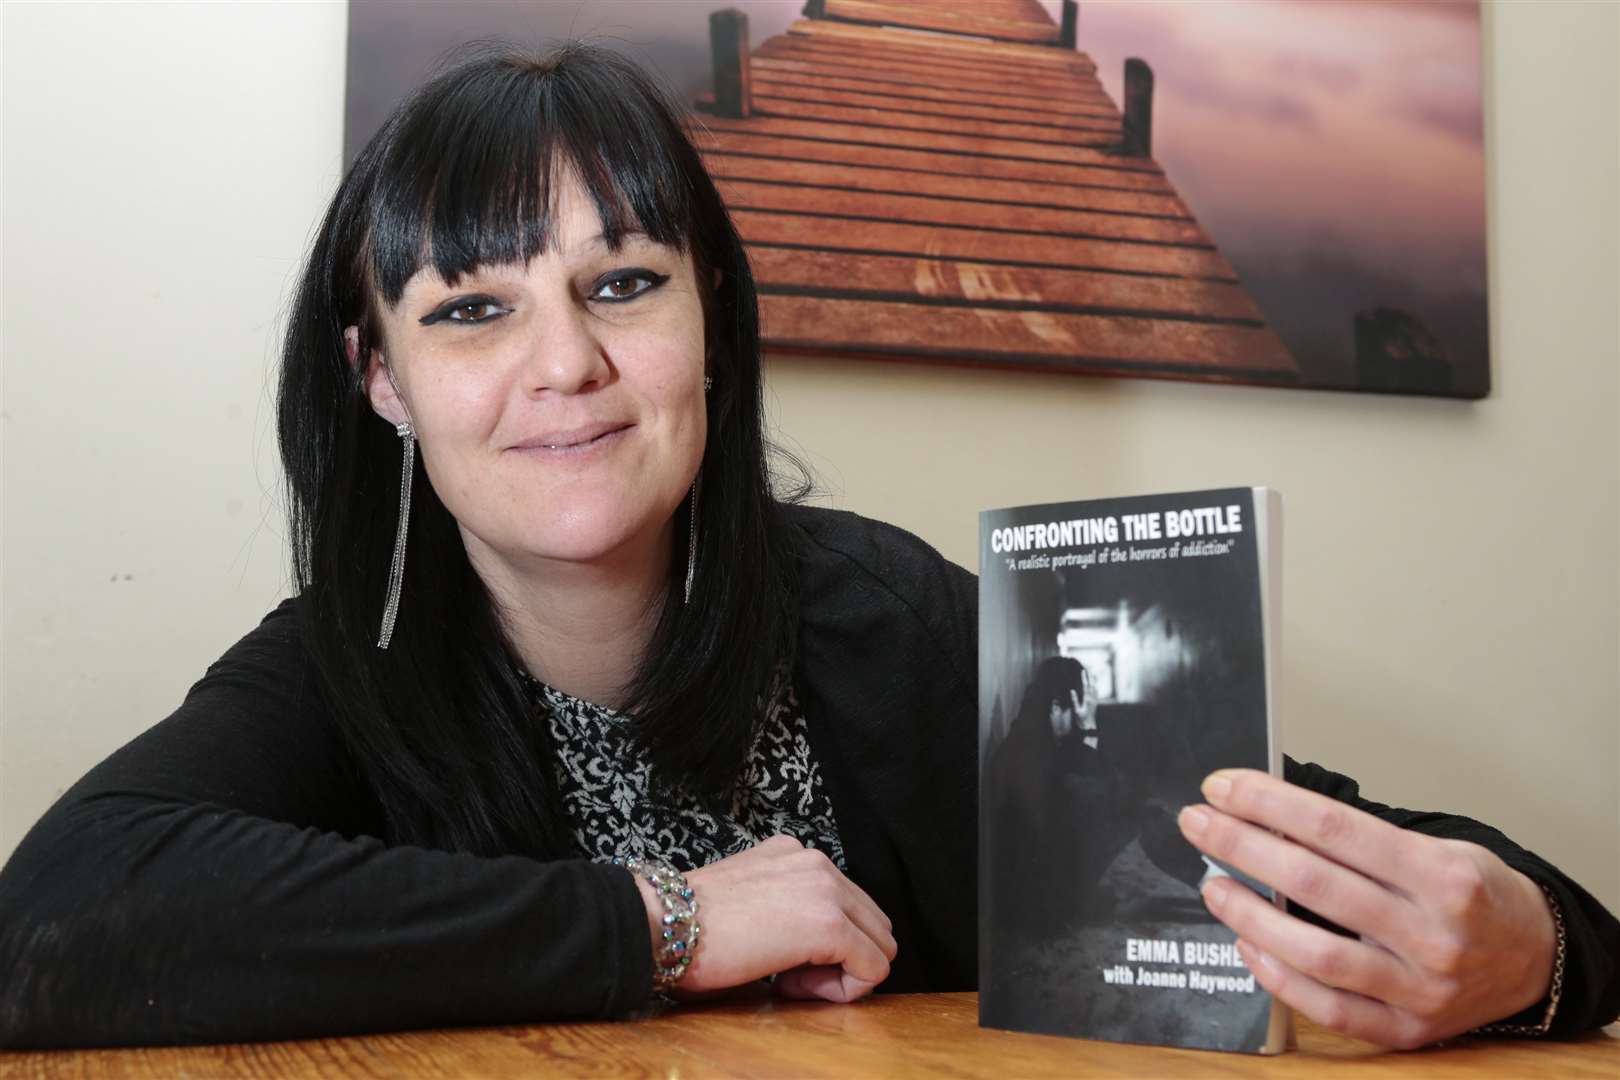 Recovering alcoholic Emma Bushen with the book she has written about her struggles with addiction